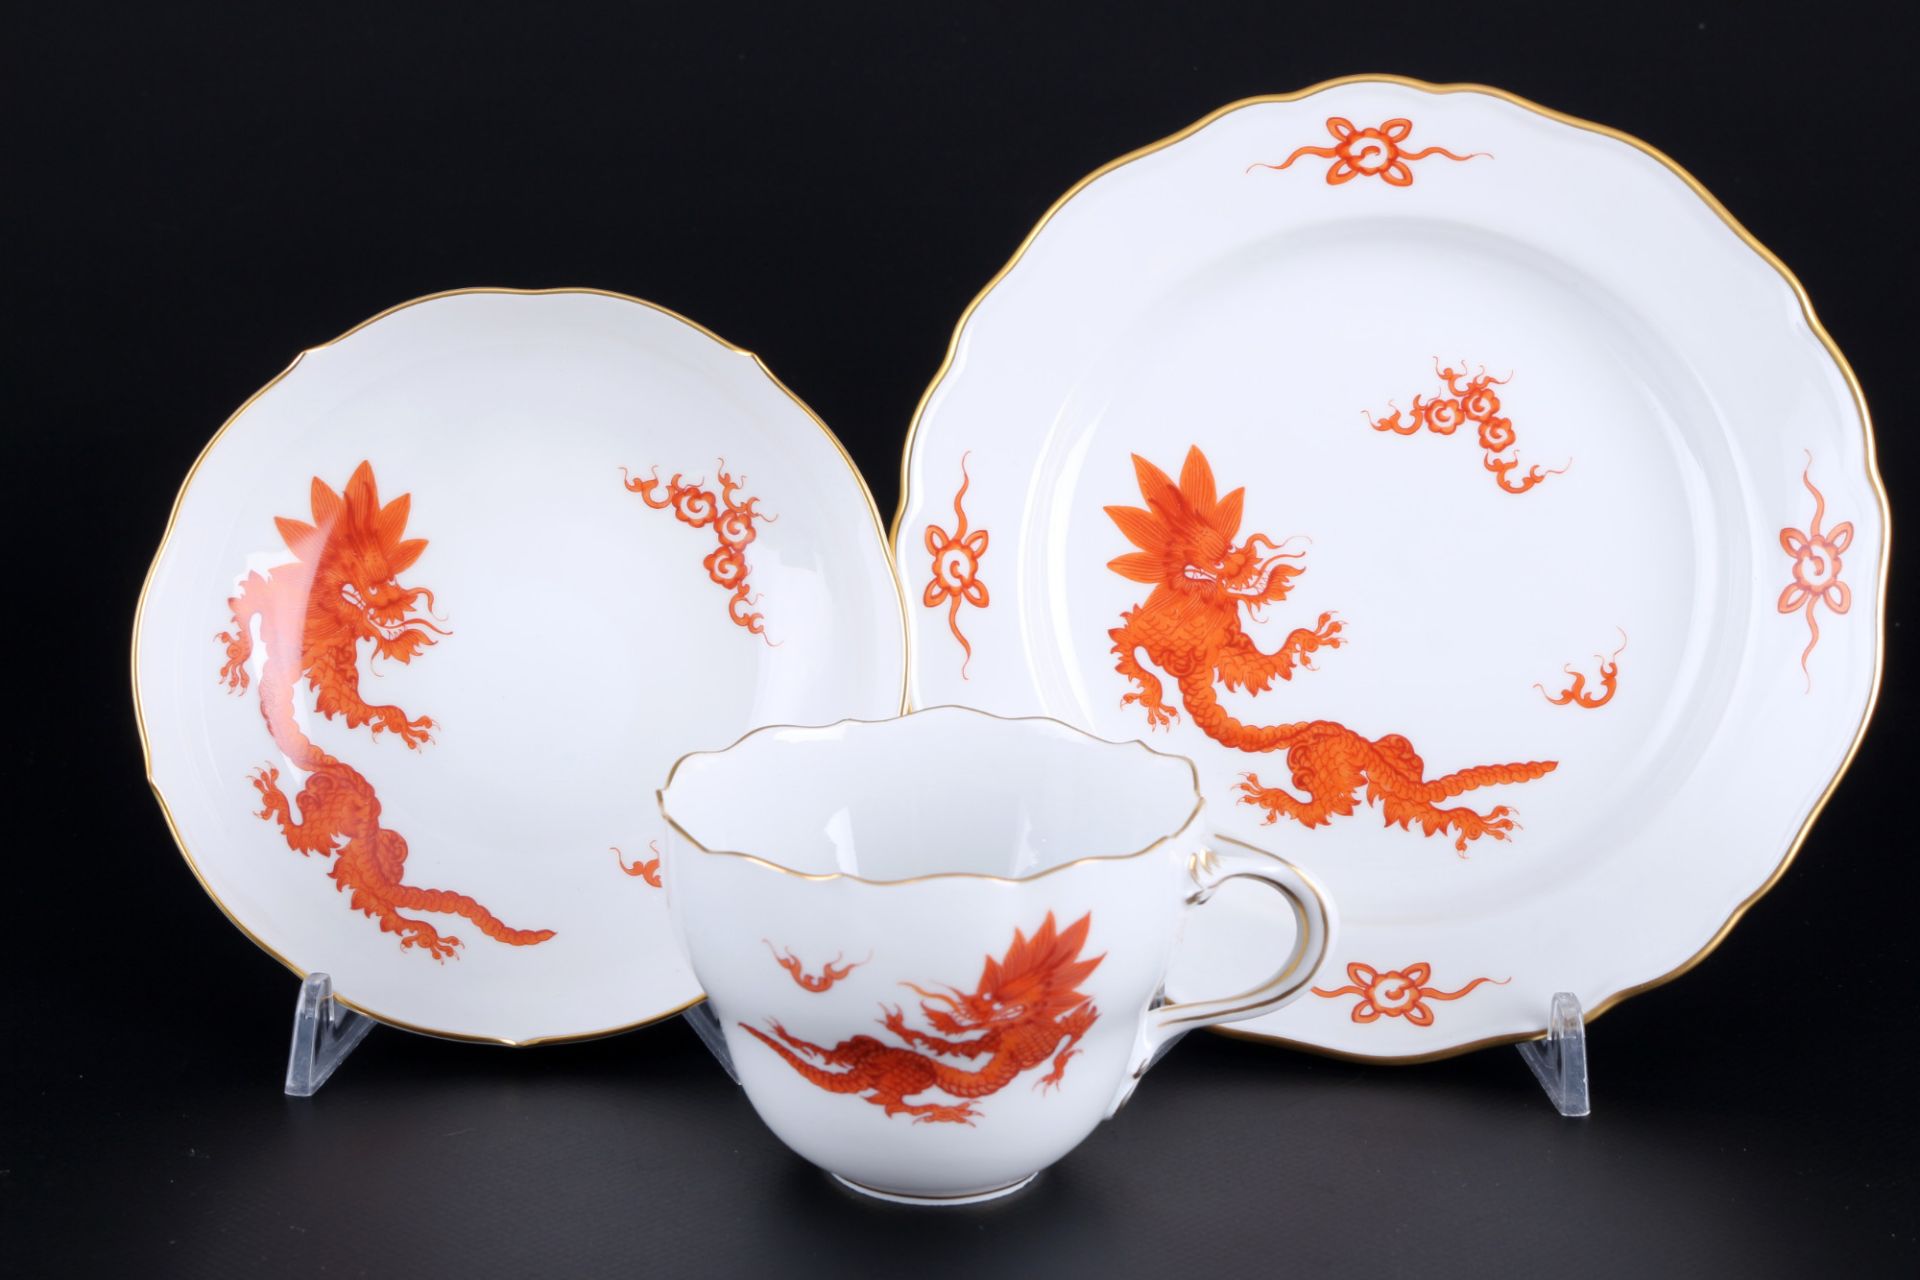 Meissen Red Ming Dragon coffee service for 6 persons 1st choice, Kaffeeservice für 6 Personen 1.Wahl - Image 2 of 6